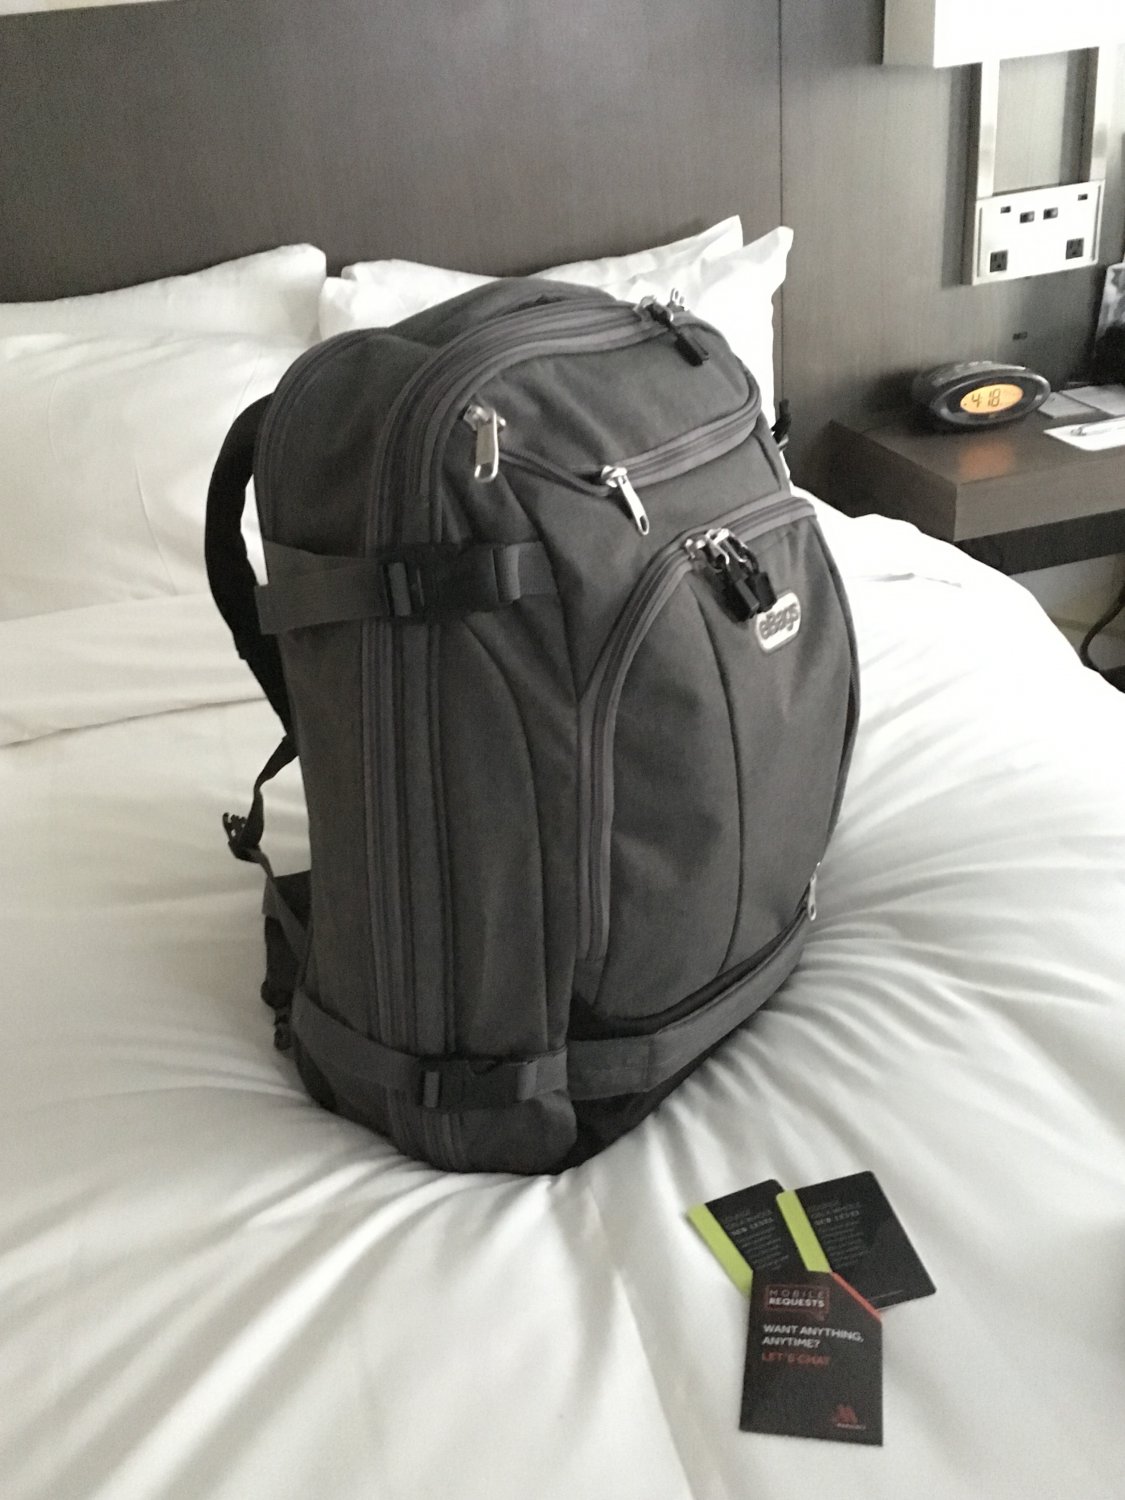 mother lode jr travel backpack review